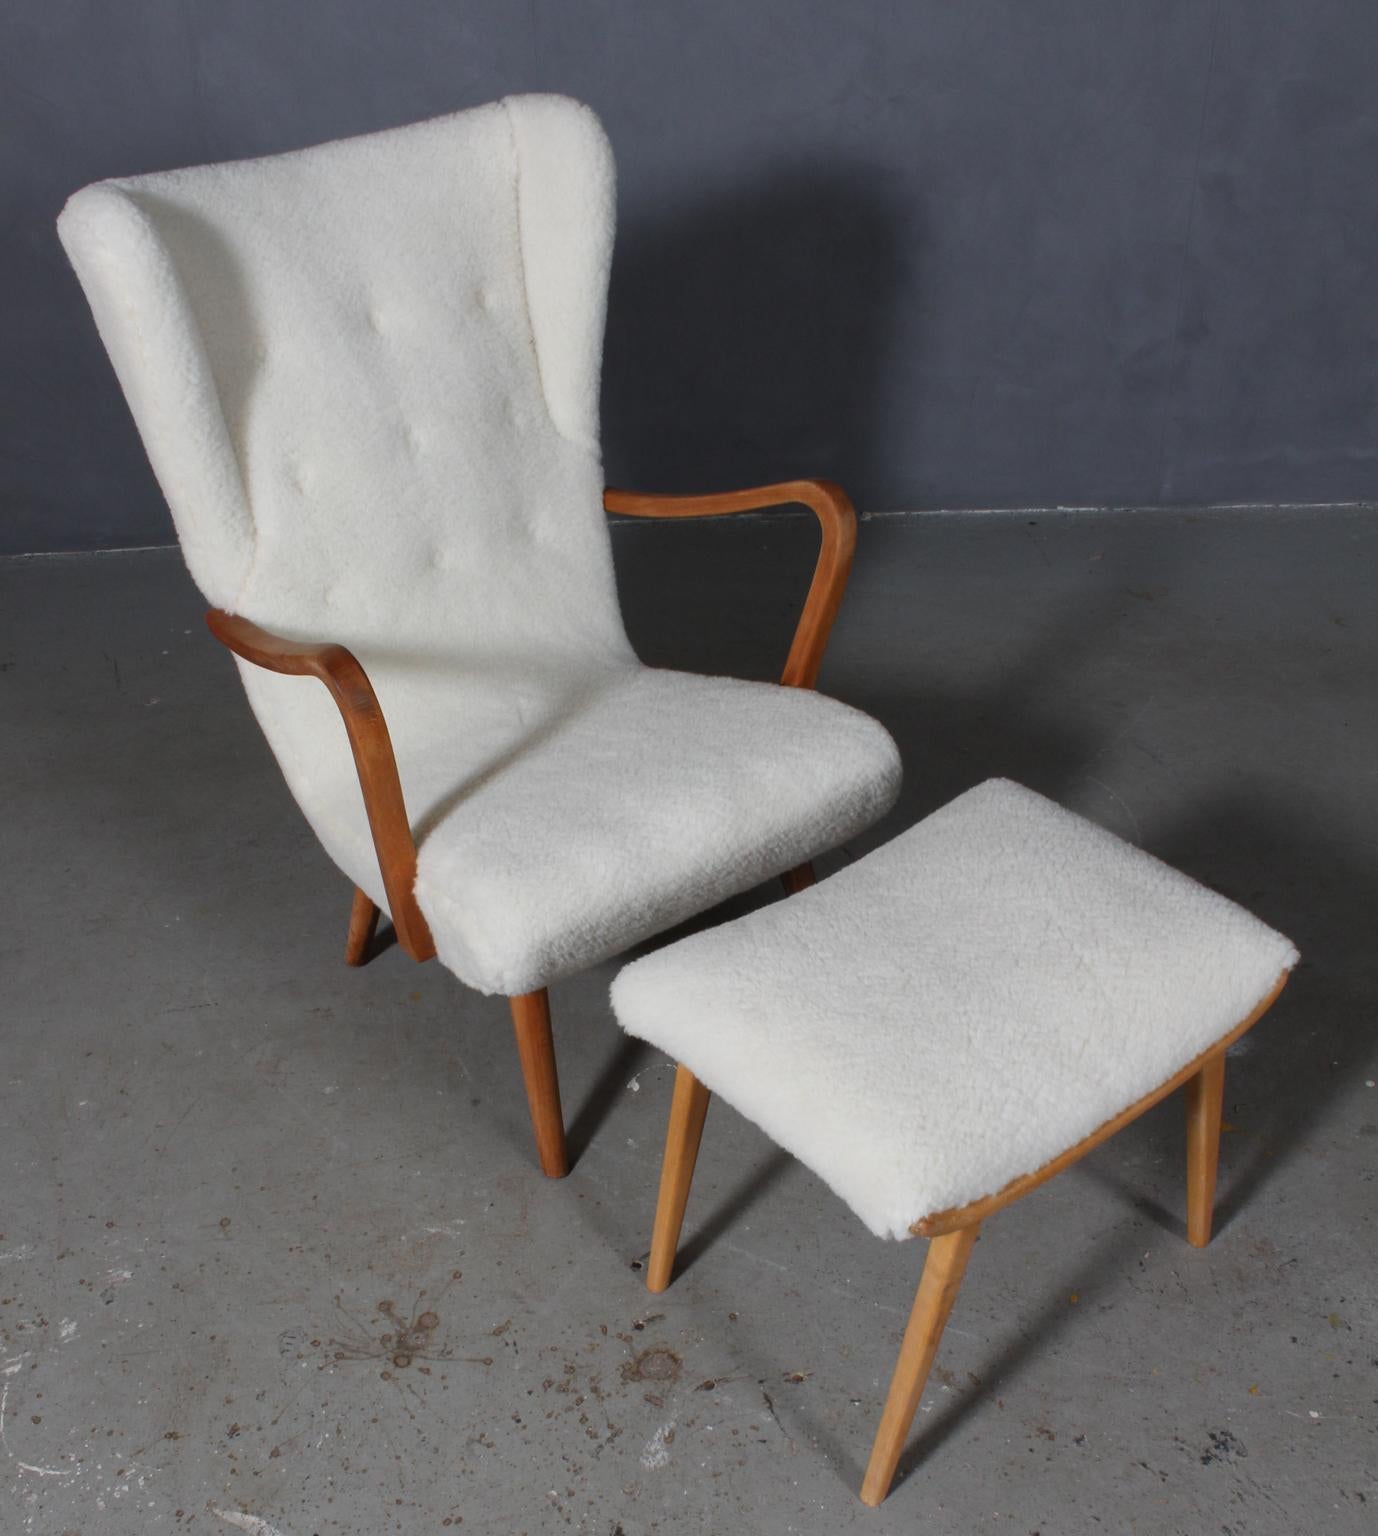 Danish cabinetmaker lounge chair new upholstered with lambswool. With ottoman.

Legs and armrests of beech.

Made in the 1940s.

